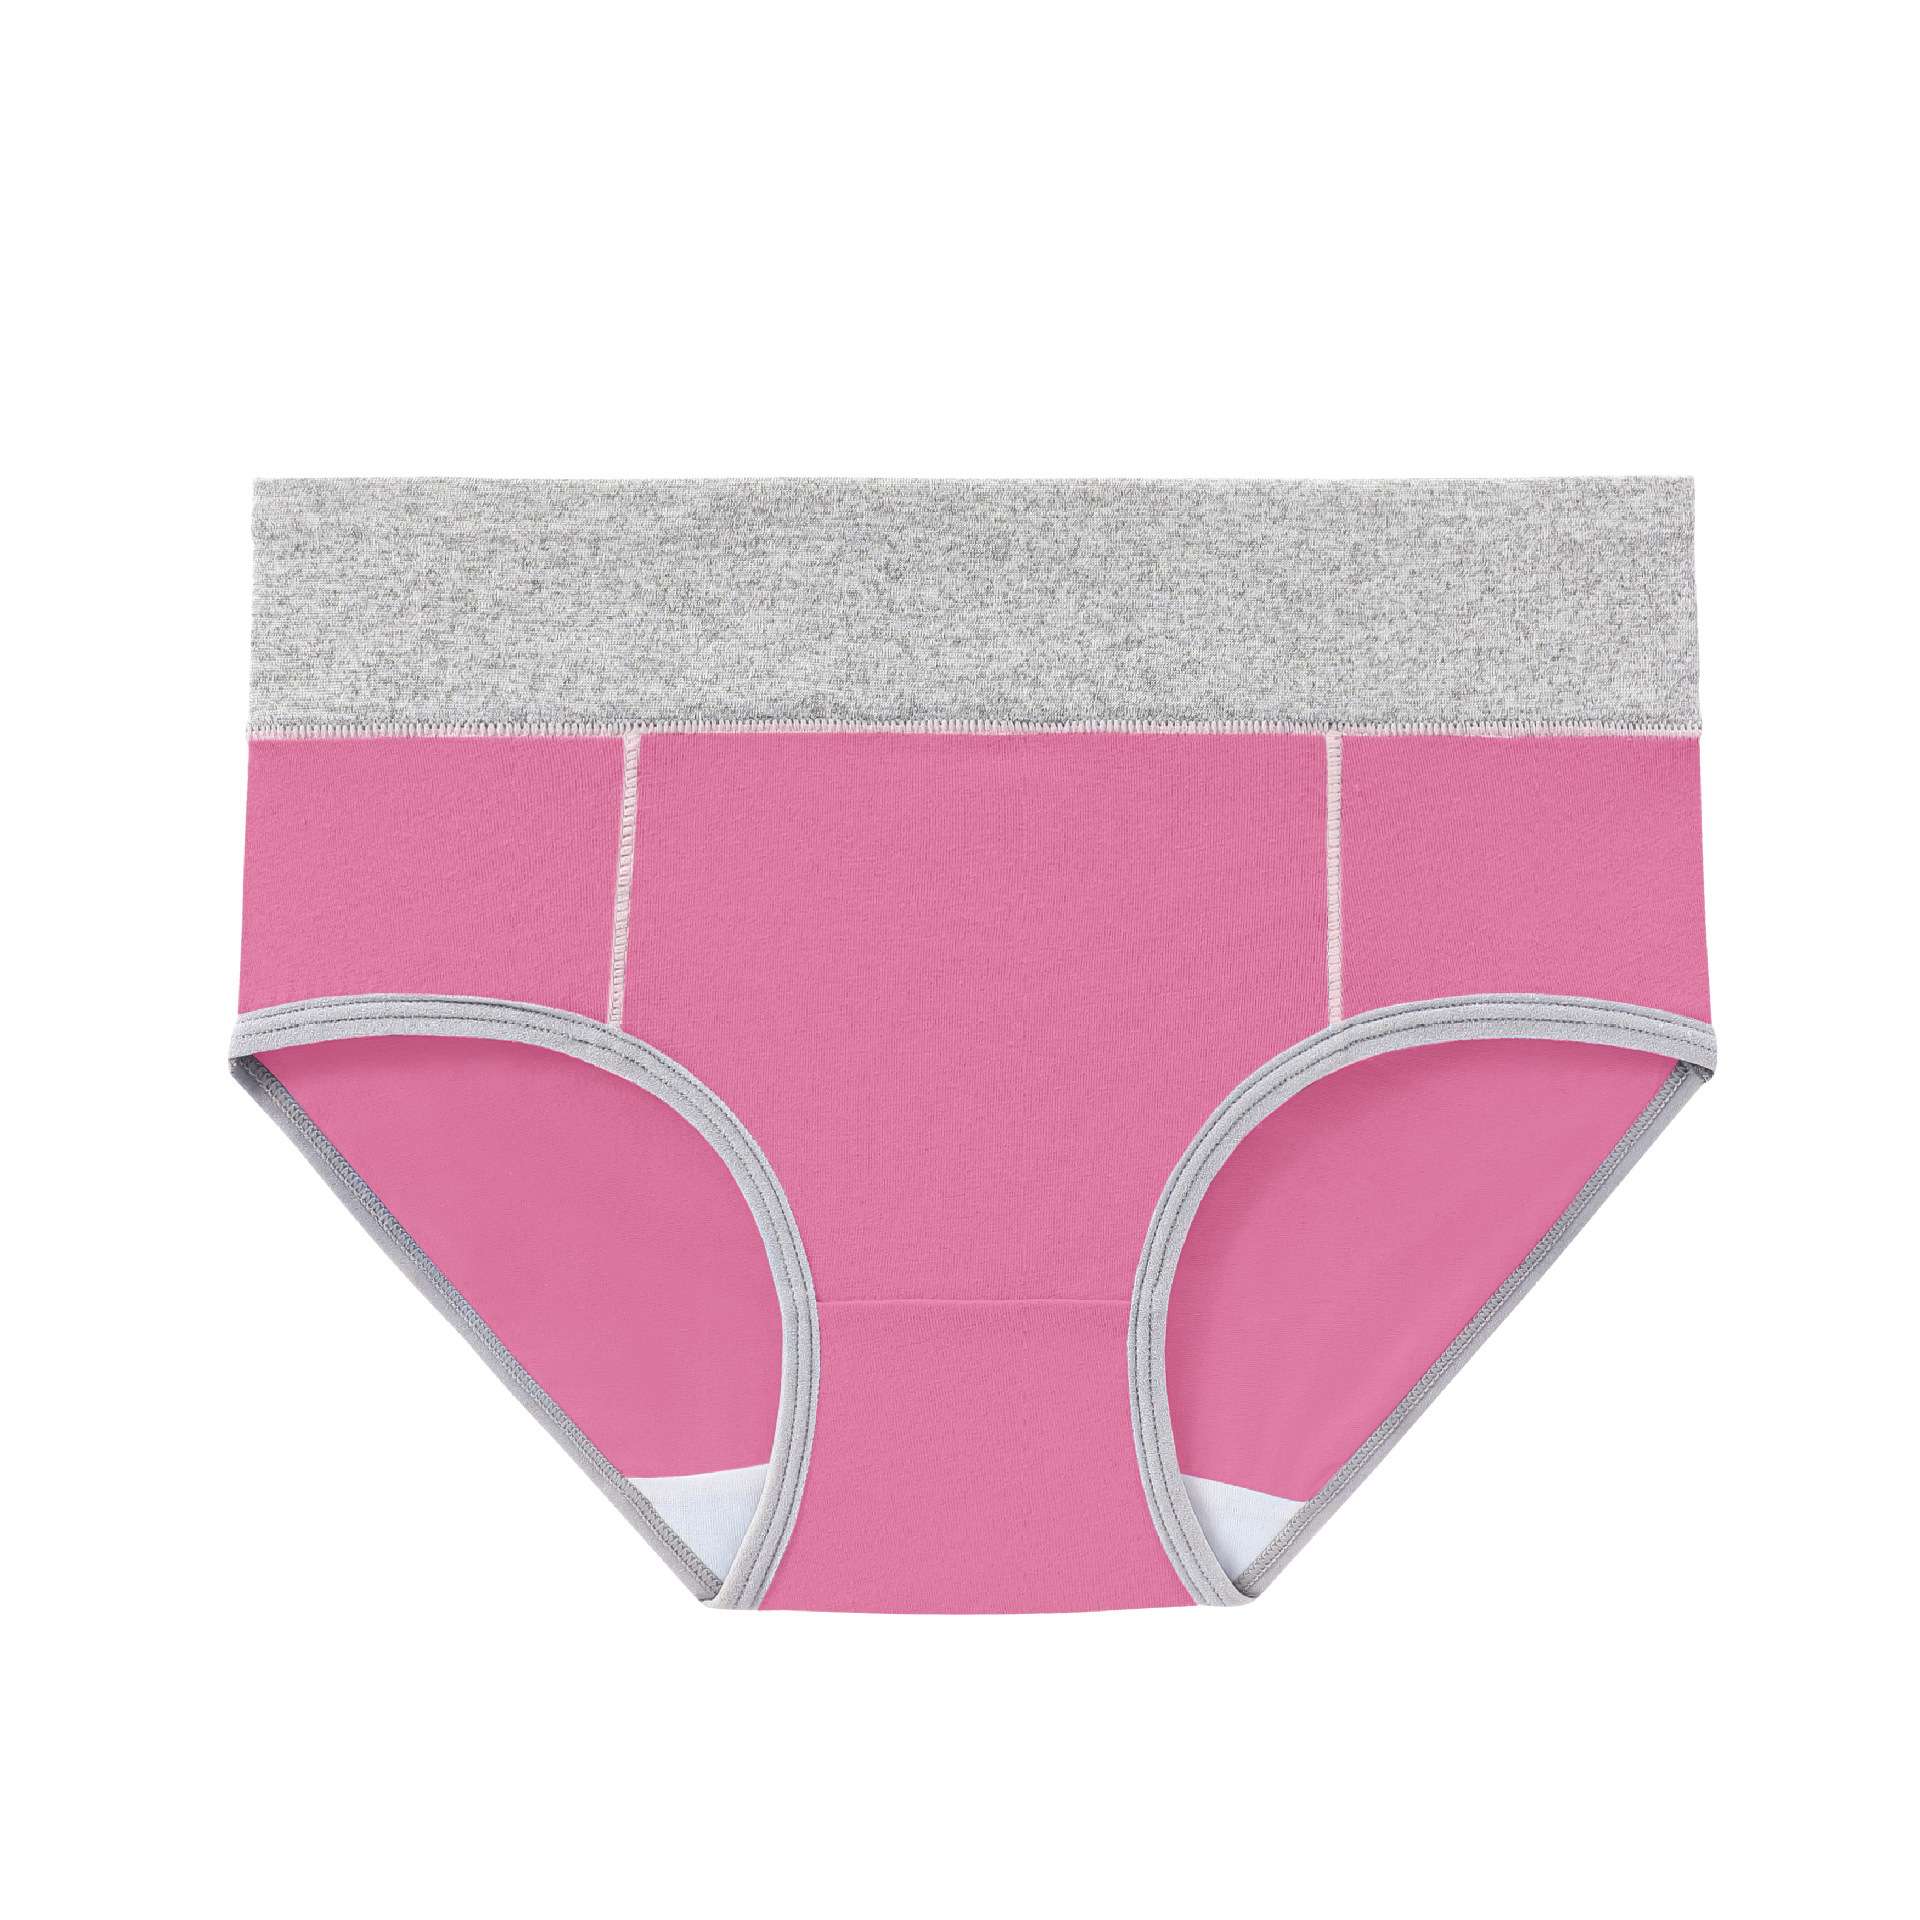 Wholesale Women Menstrual Panties Four Layer Leakproof Sexy Thong